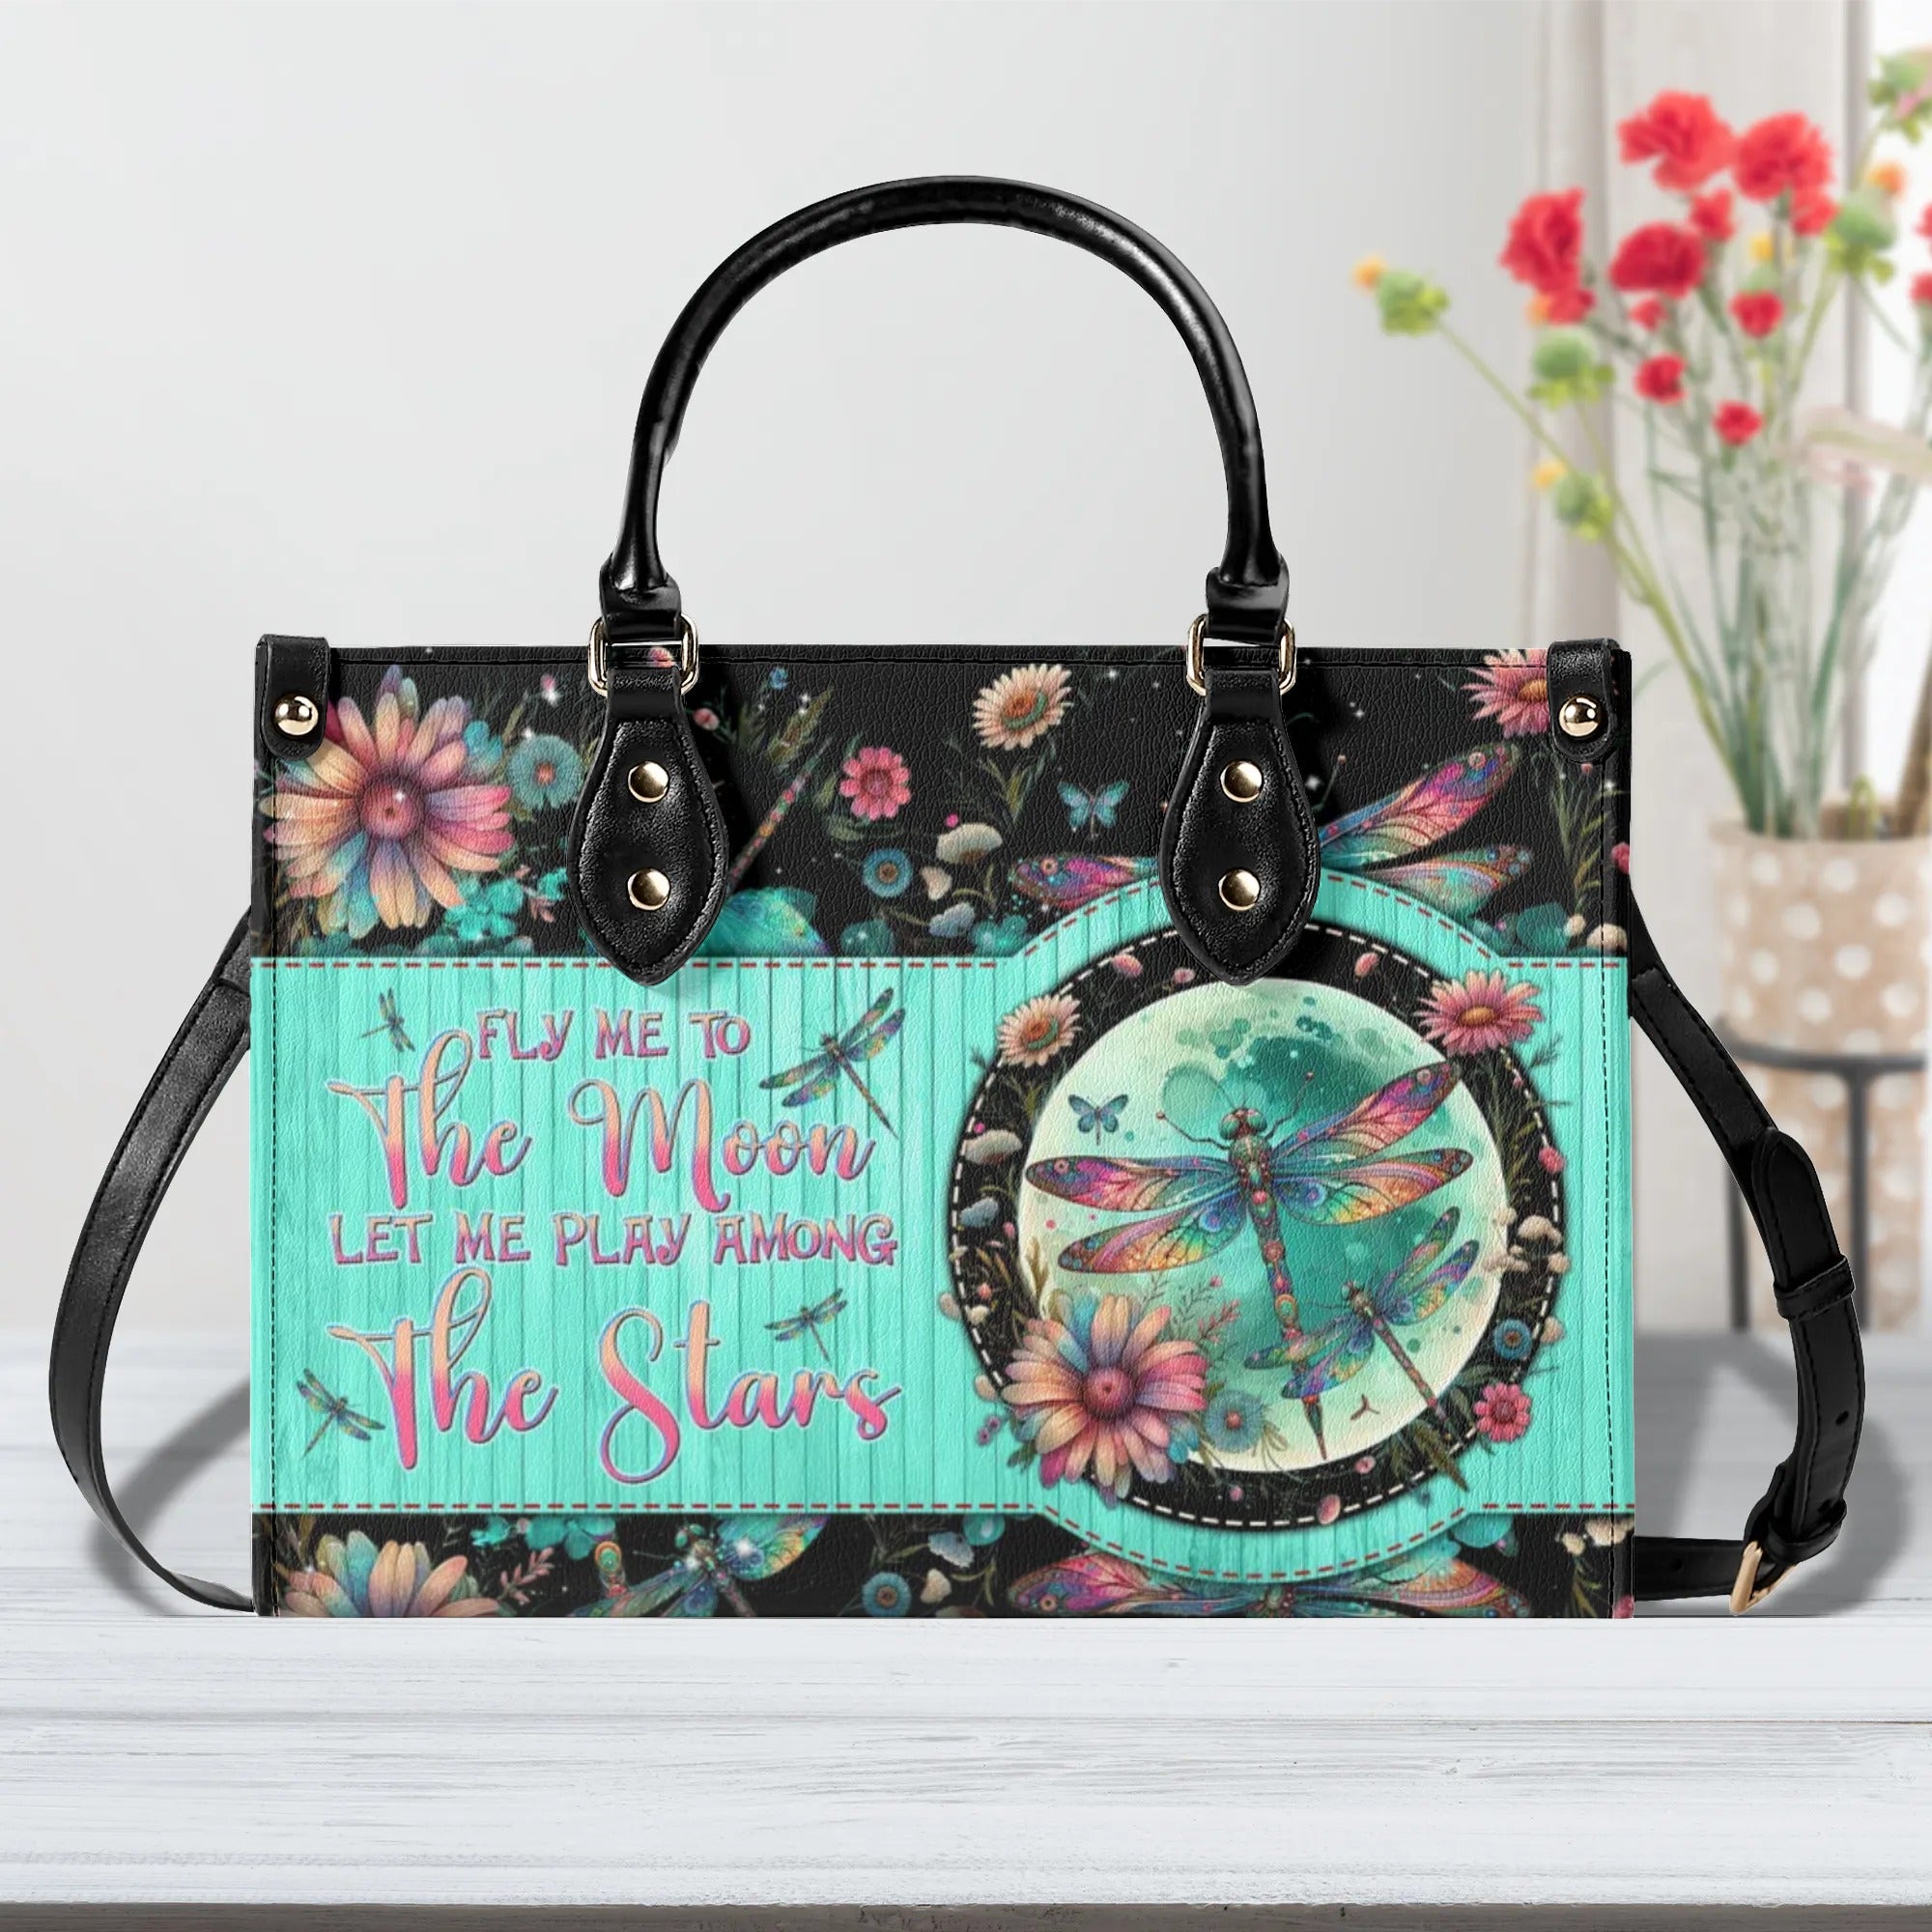 FLY ME TO THE MOON DRAGONFLY LEATHER HANDBAG - TLNT1006243